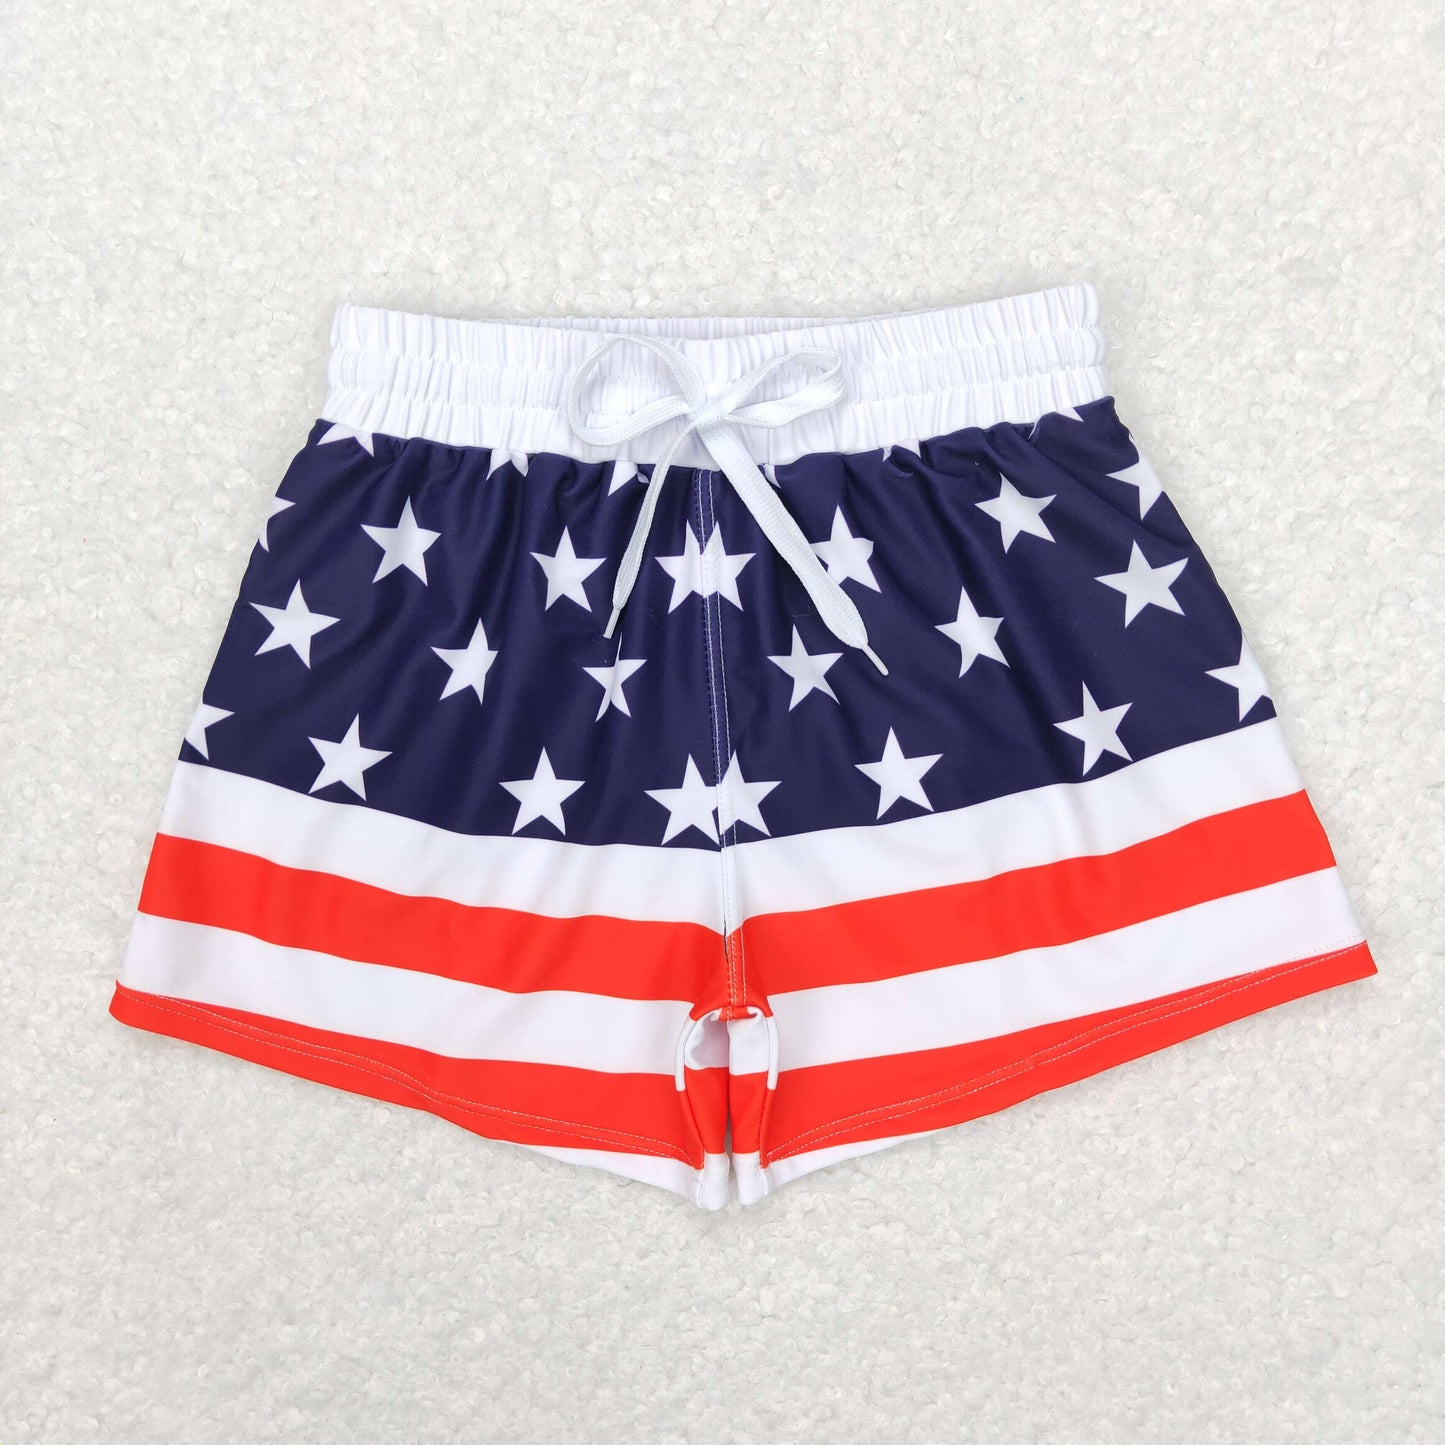 S0188 Five-pointed star red and white striped dark blue swimming trunks